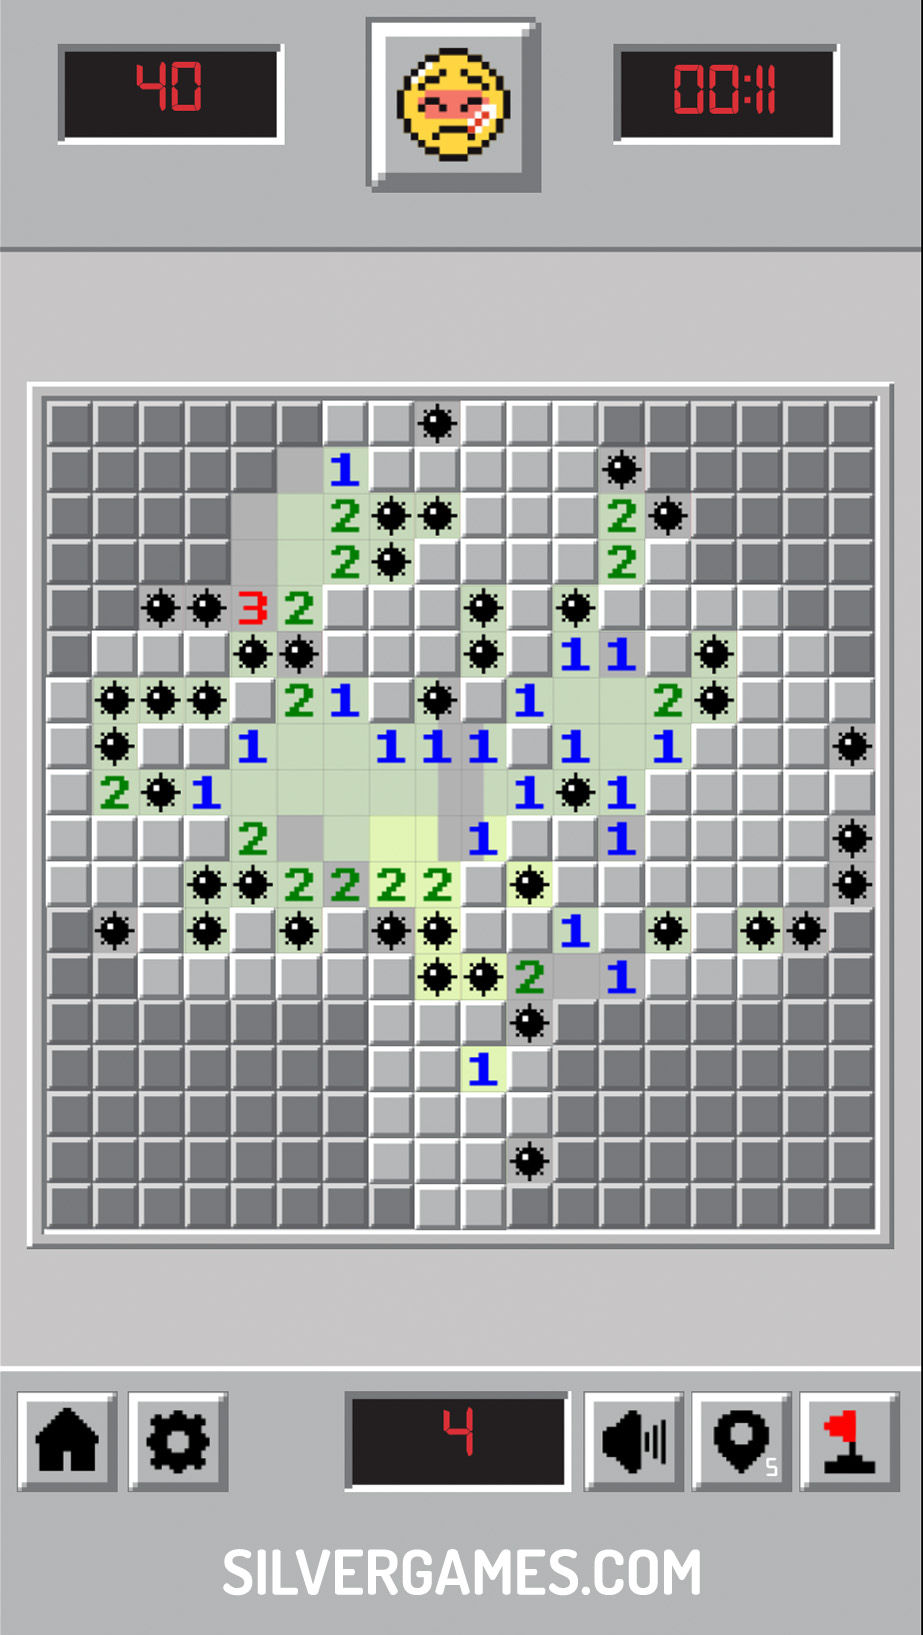 Minesweeper - Play Online at Coolmath Games